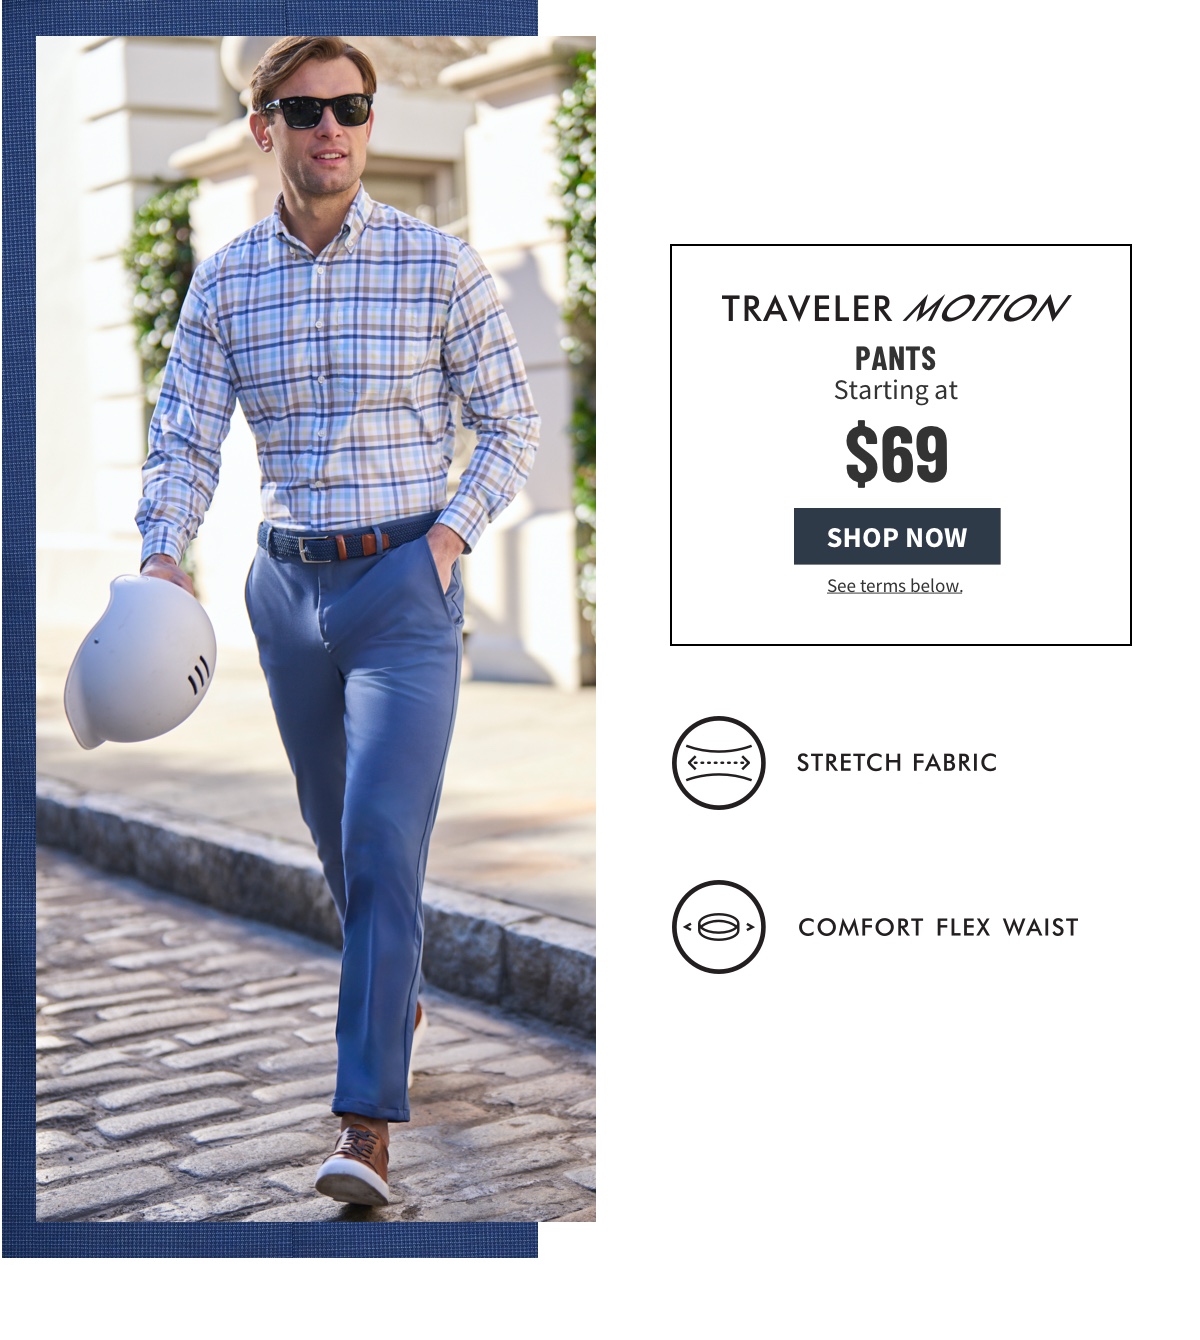 Traveler Motion Pants Starting at $69 Shop Now See terms below. Stretch Fabric Comfort Flex Waist